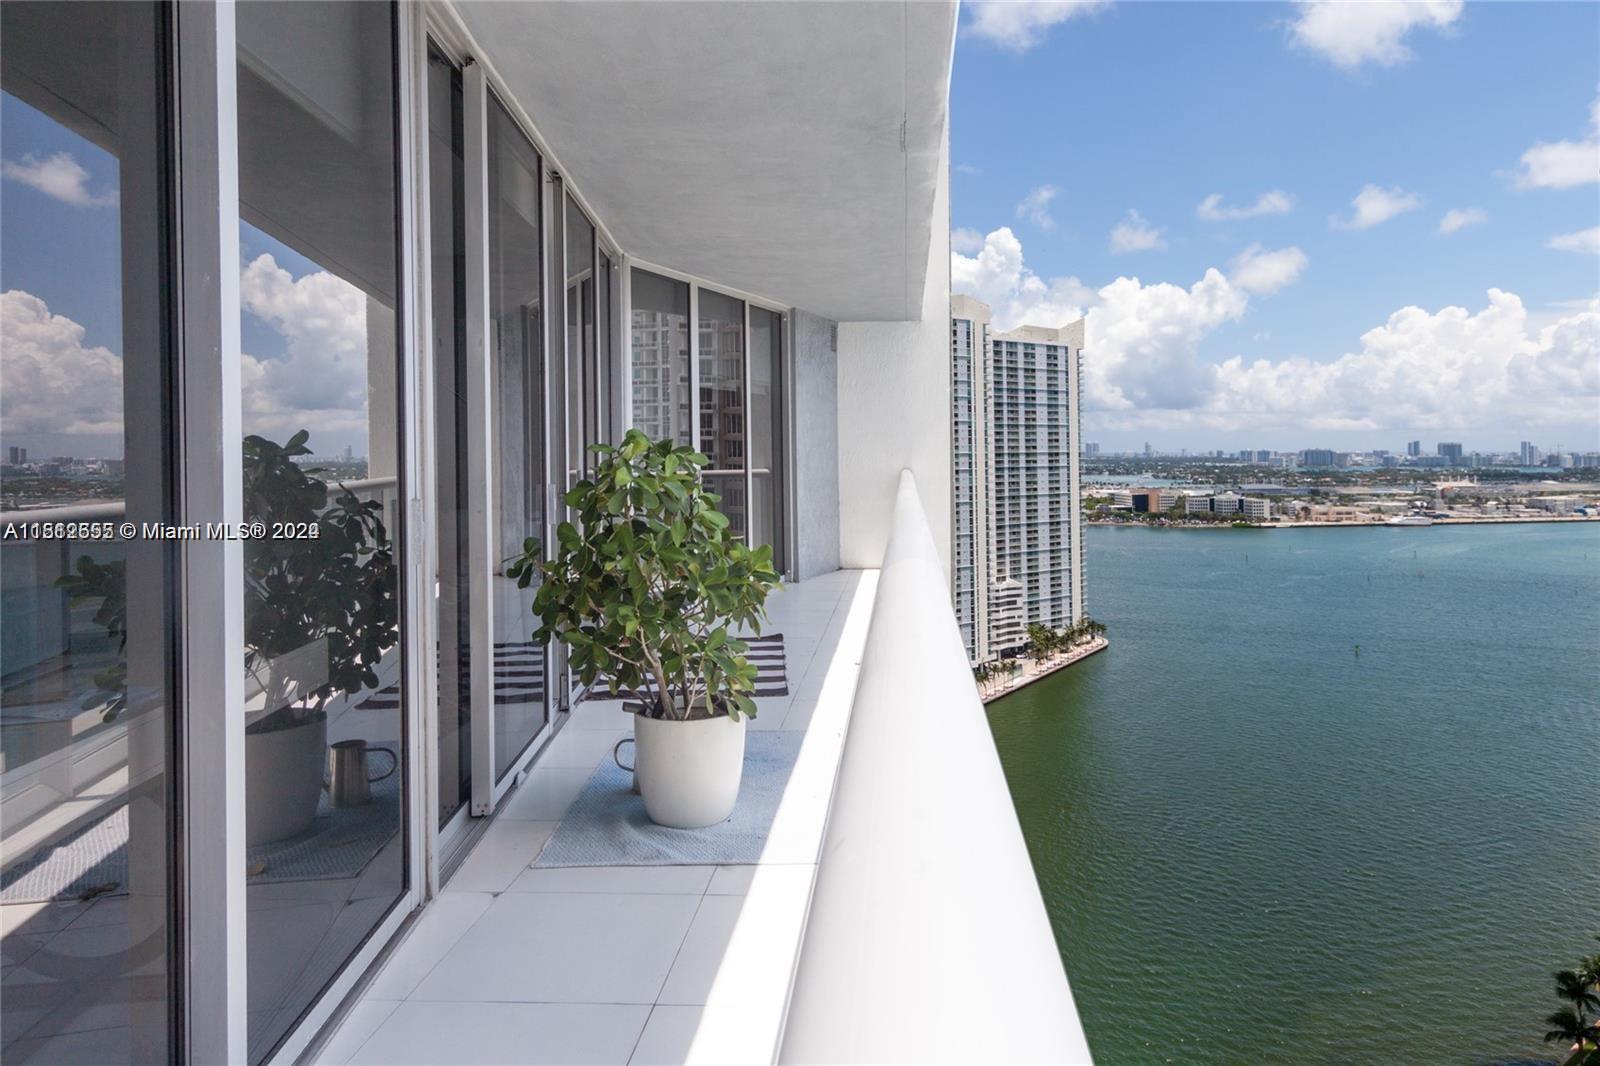 This spacious furnished 2-bedroom, 2-bathroom + Den unit at Icon Brickell offers fantastic water views and an amazing space to call home. The home features many upgrades including white porcelain floors, and an open kitchen with high-end appliances. The den is versatile, suitable for use as a playroom, home office, guest room, or any other creative purpose.  

Icon Brickell is a highly-sought-after, pet-friendly building that offers a full amenity package, which distinguishes itself from other buildings in the area. Amenities include a state-of-the-art gym and spa, infinity pool, theater, valet, and security. The location is near many popular restaurants, shopping, the beach, and much more.  

*See Broker's Remarks prior to requesting a showing.